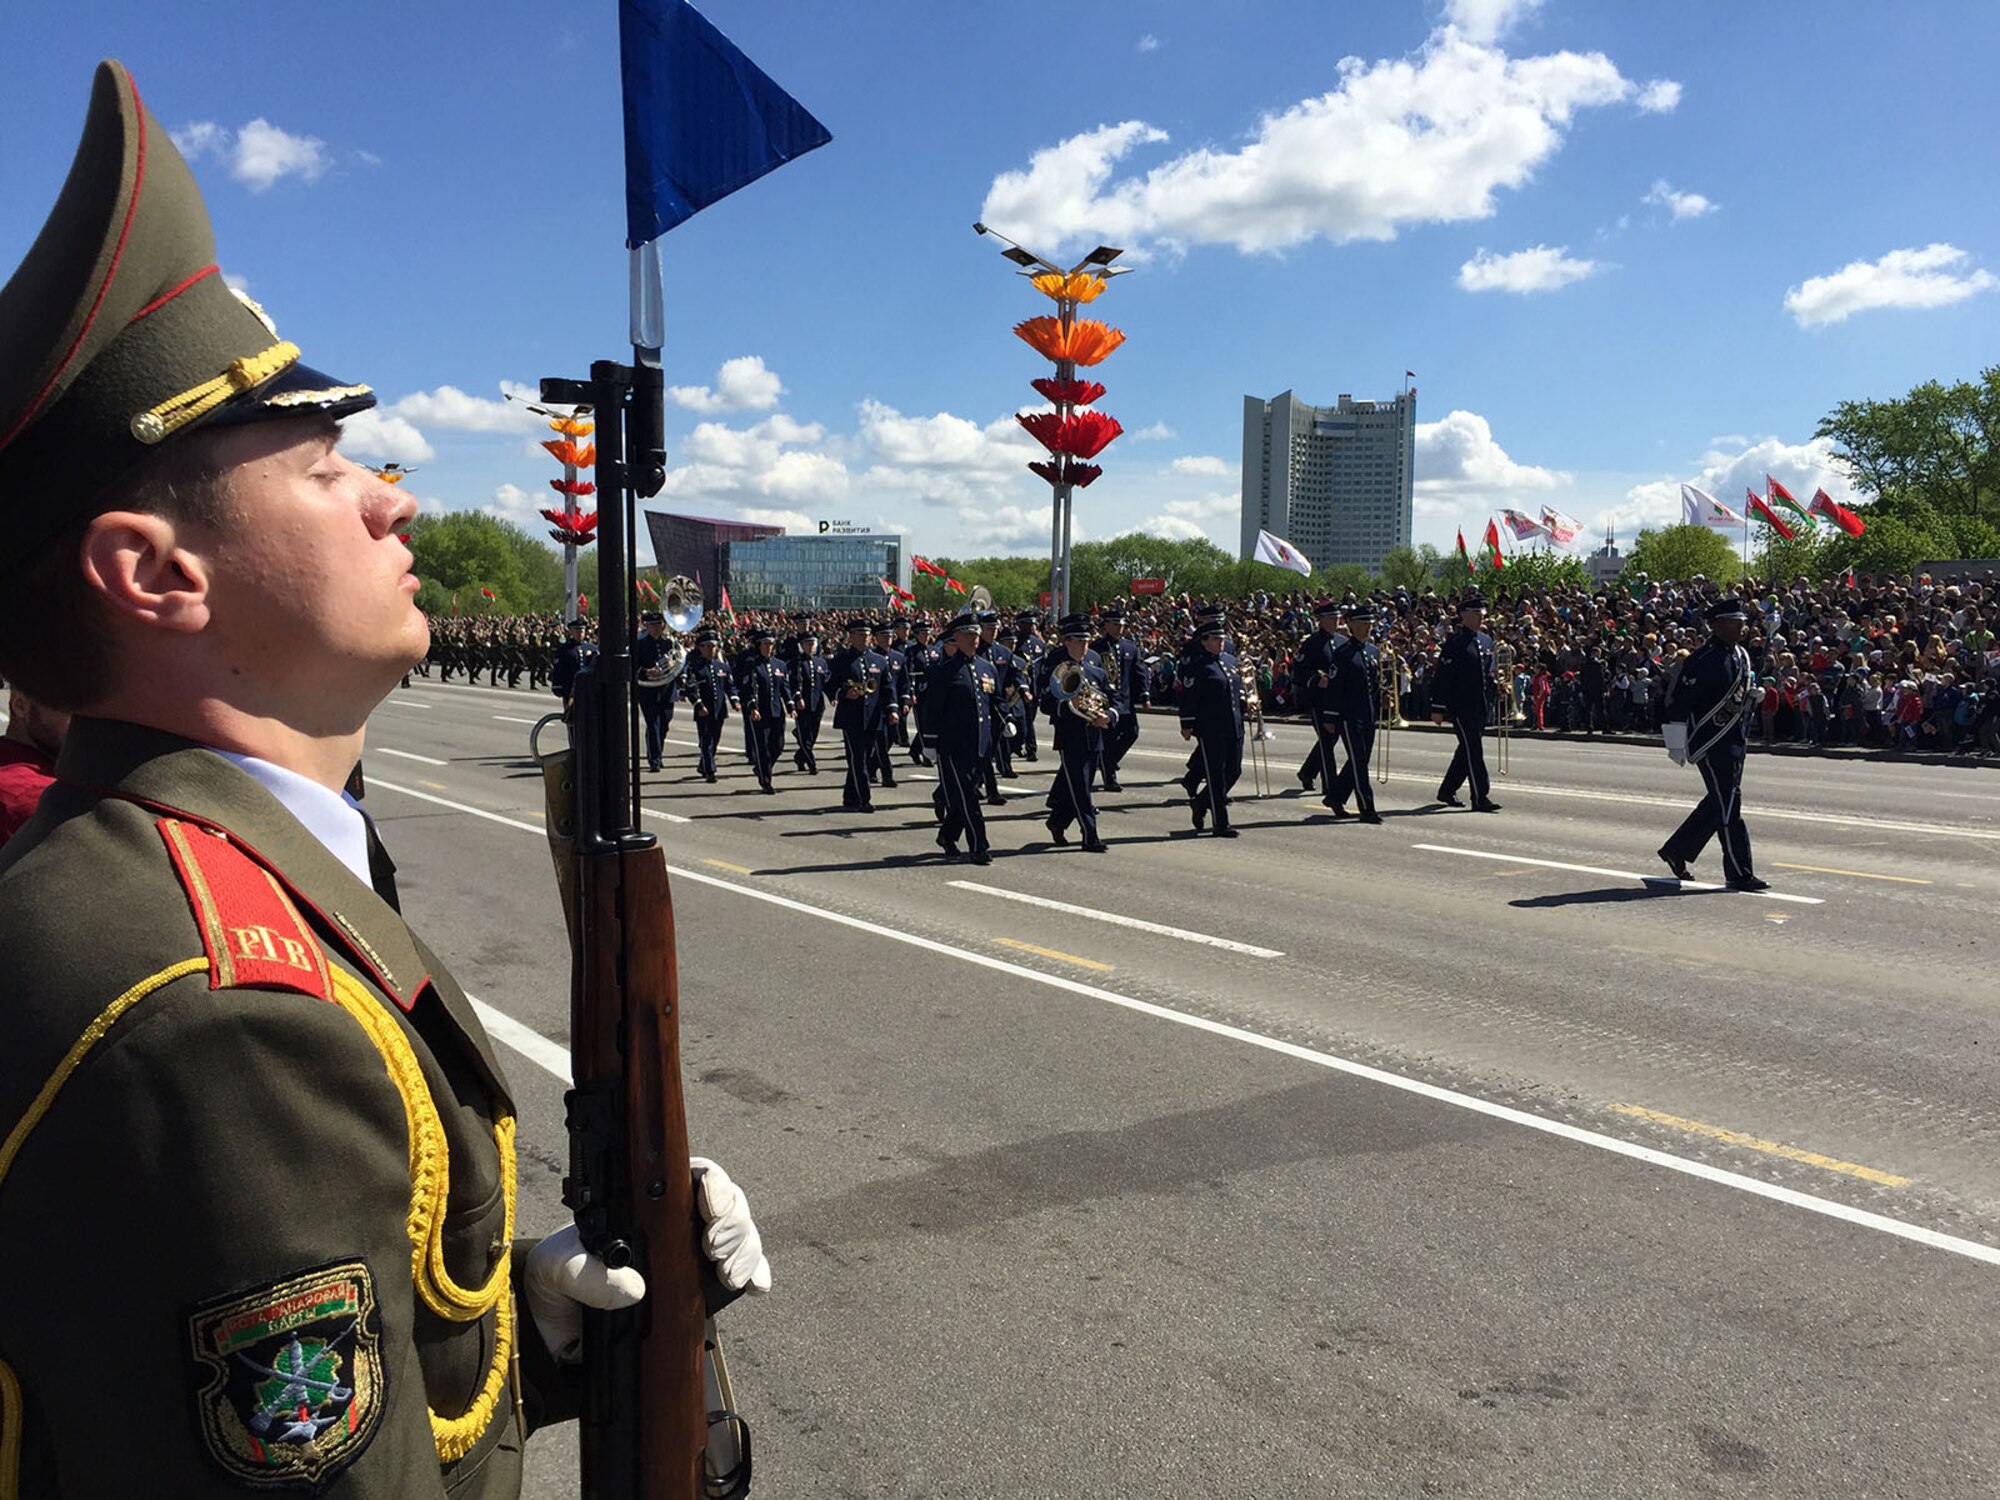 MINSK, BELARUS -- An Armed Forces of Belarus soldier provides an honor guard 
as 34 Airmen from the U.S. Air Forces in Europe Band march in the World War II 
Victory Day Parade May 9, 2015, in Minsk, Belarus. The band's involvement is 
the first time in Belarus' history that participants from the U.S. Department 
of Defense marched in the parade.  The event commemorates the sacrifices of 
the World War II Allies and the end of hostilities 70 years ago. In addition 
to their participation in the Victory Day parade, which included more than 
5,000 Belarussian soldiers and 250 military vehicles, the USAFE bandsmen 
performed in concerts Brest and Minsk, Belarus. (U.S. Air Force photo by 
Master Sgt. Brian Bahret)
